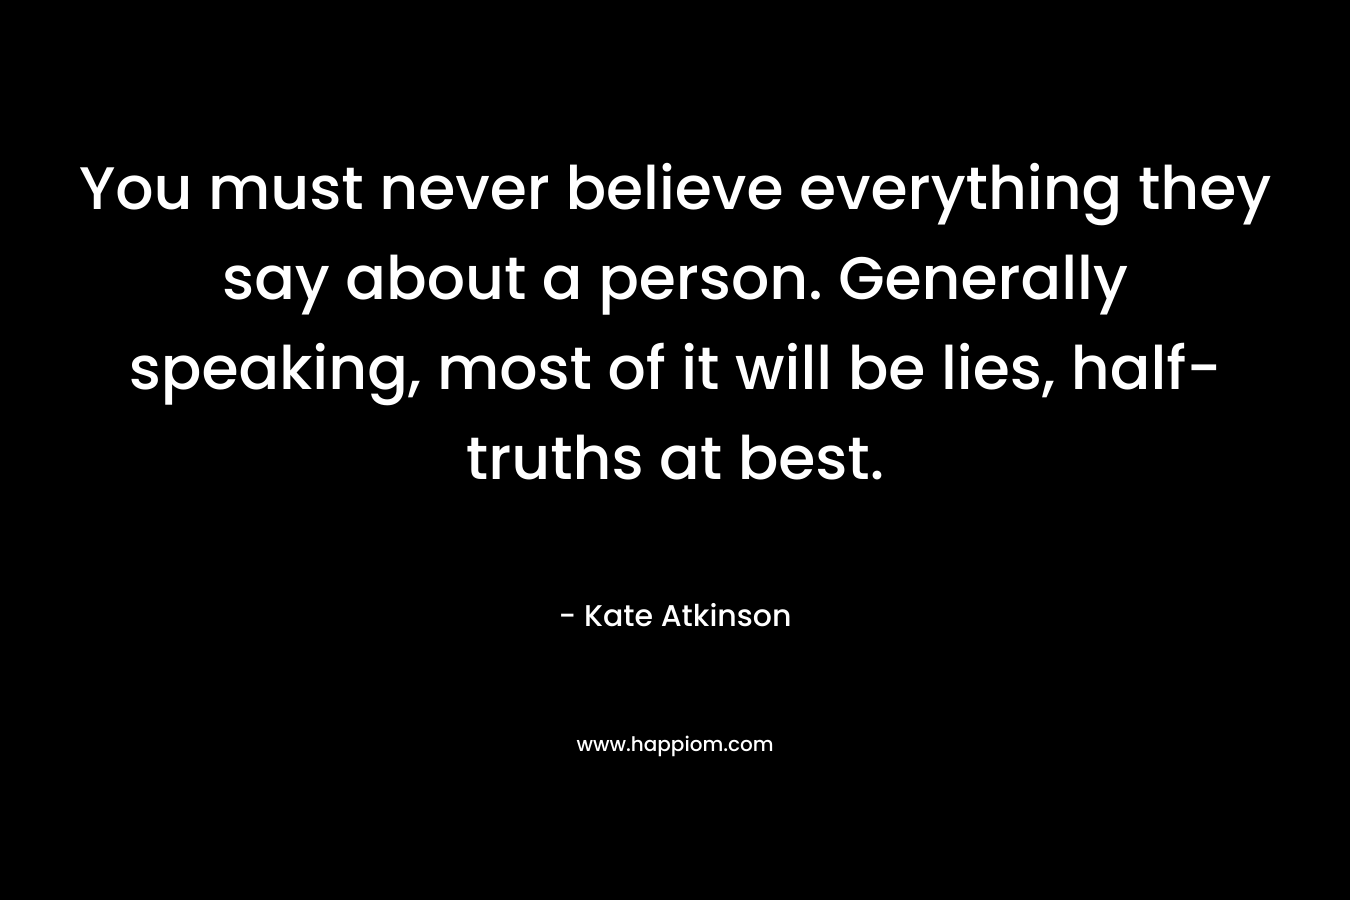 You must never believe everything they say about a person. Generally speaking, most of it will be lies, half-truths at best.